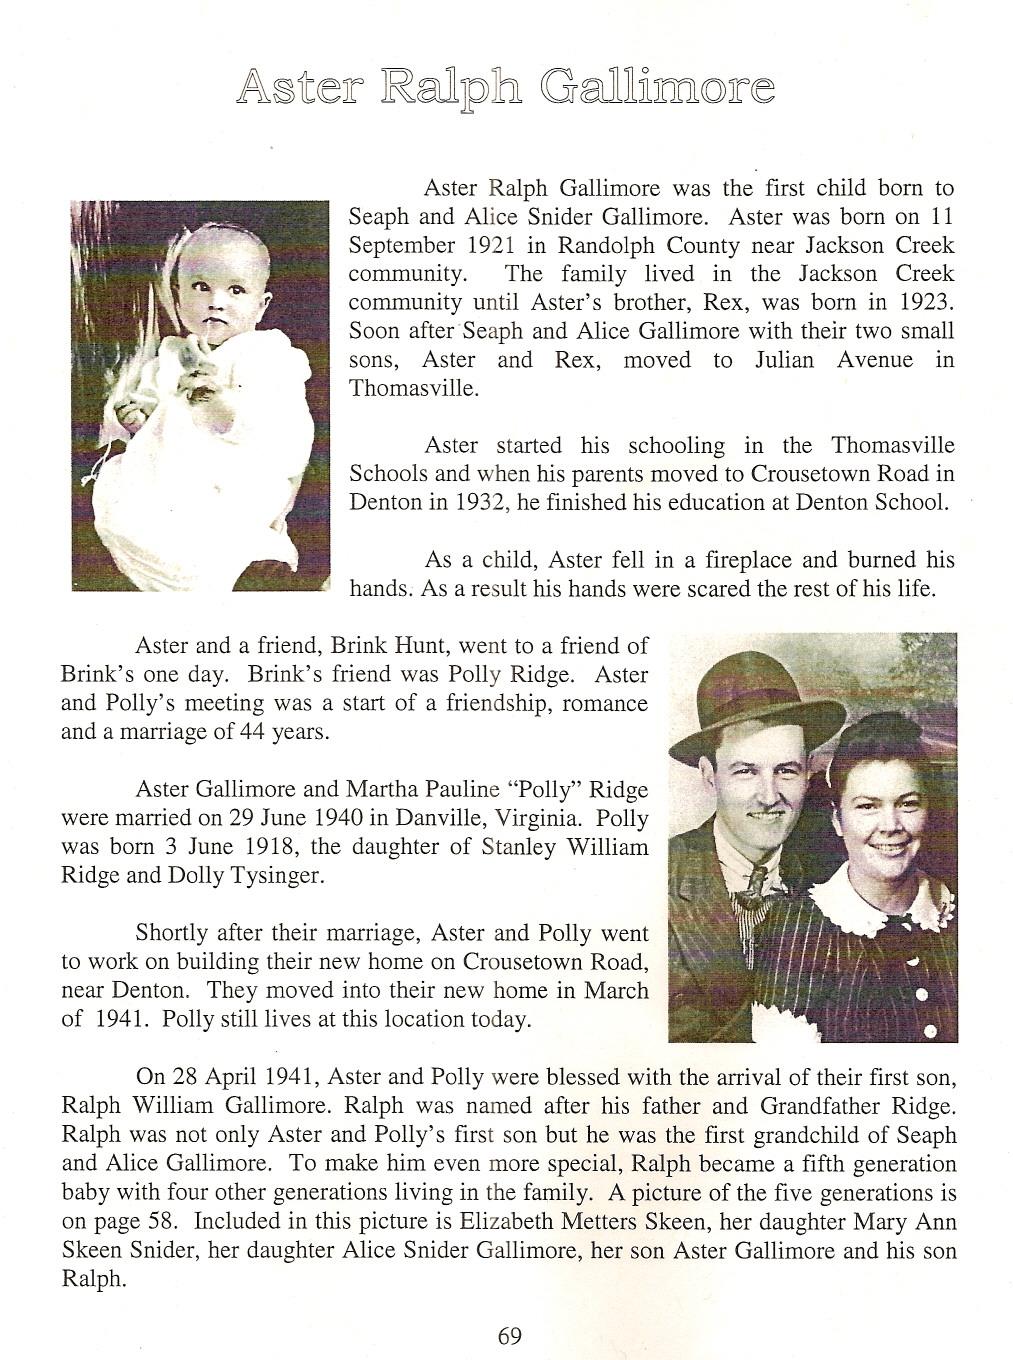 Aster Ralph Gallimore was the first child born to Seaph and Alice Snider Gallimore. Aster was born on 11 September 1921 in Randolph County near Jackson Creek community.